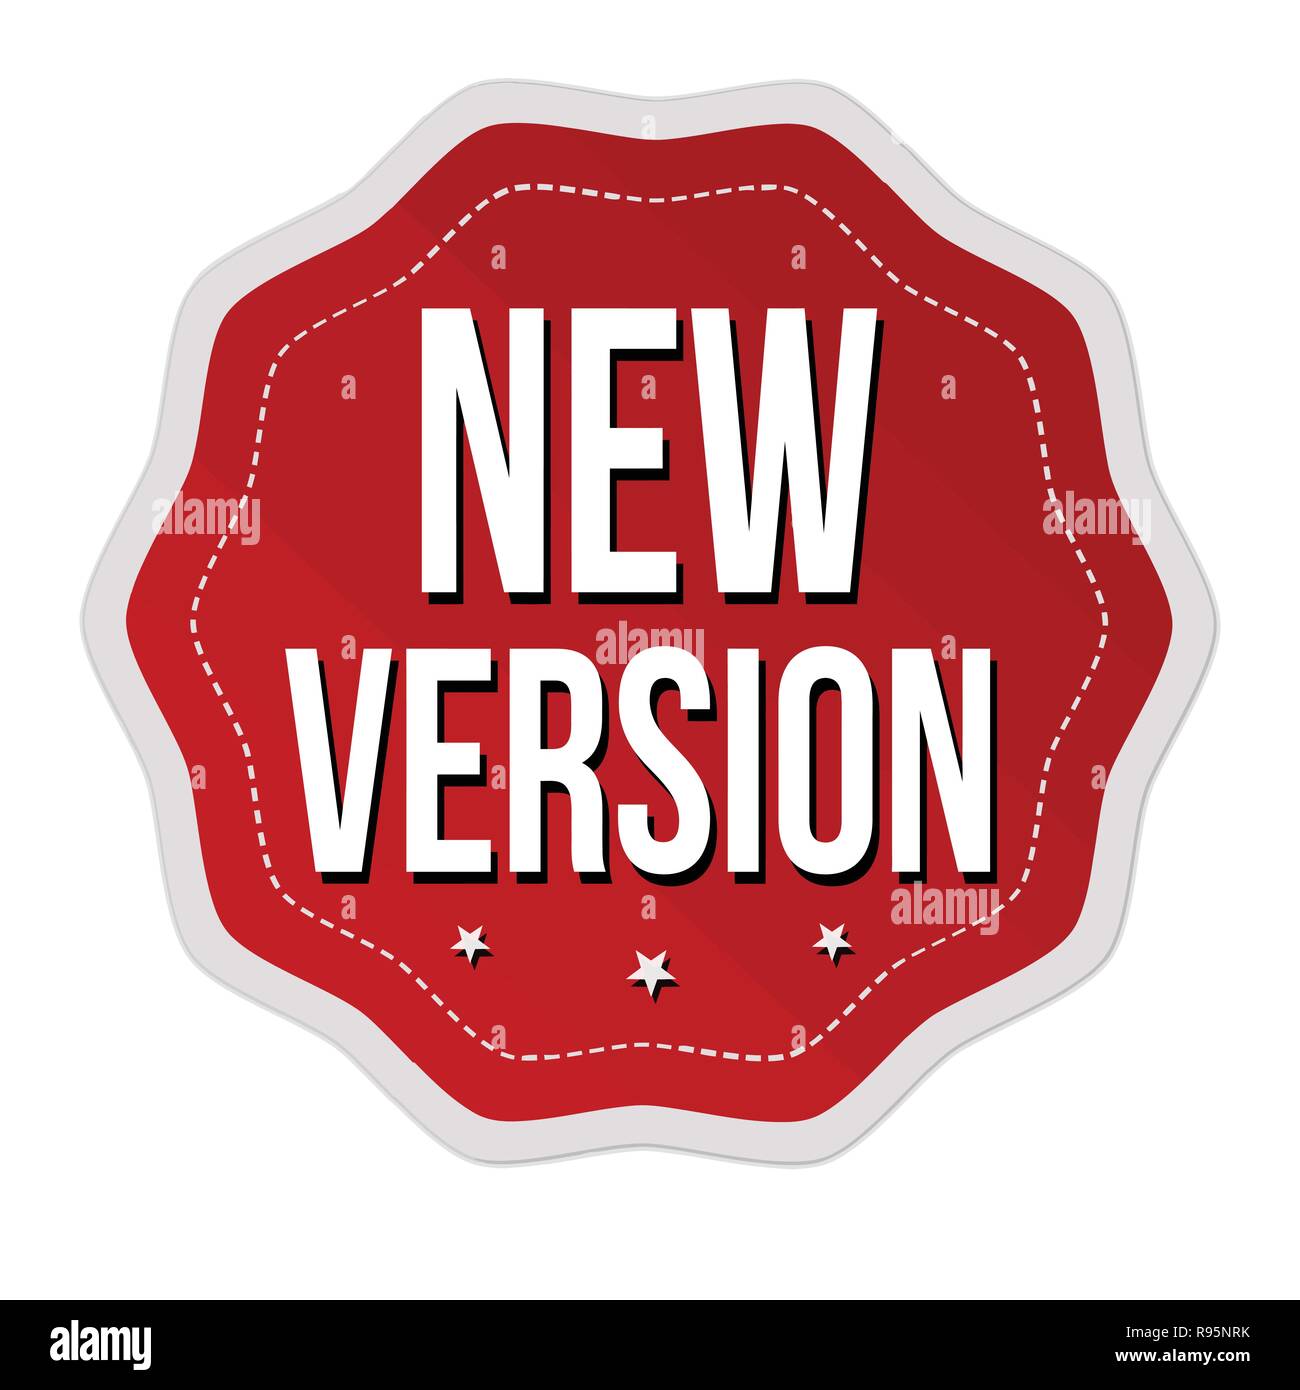 New version label or sticker on white background, vector illustration Stock Vector